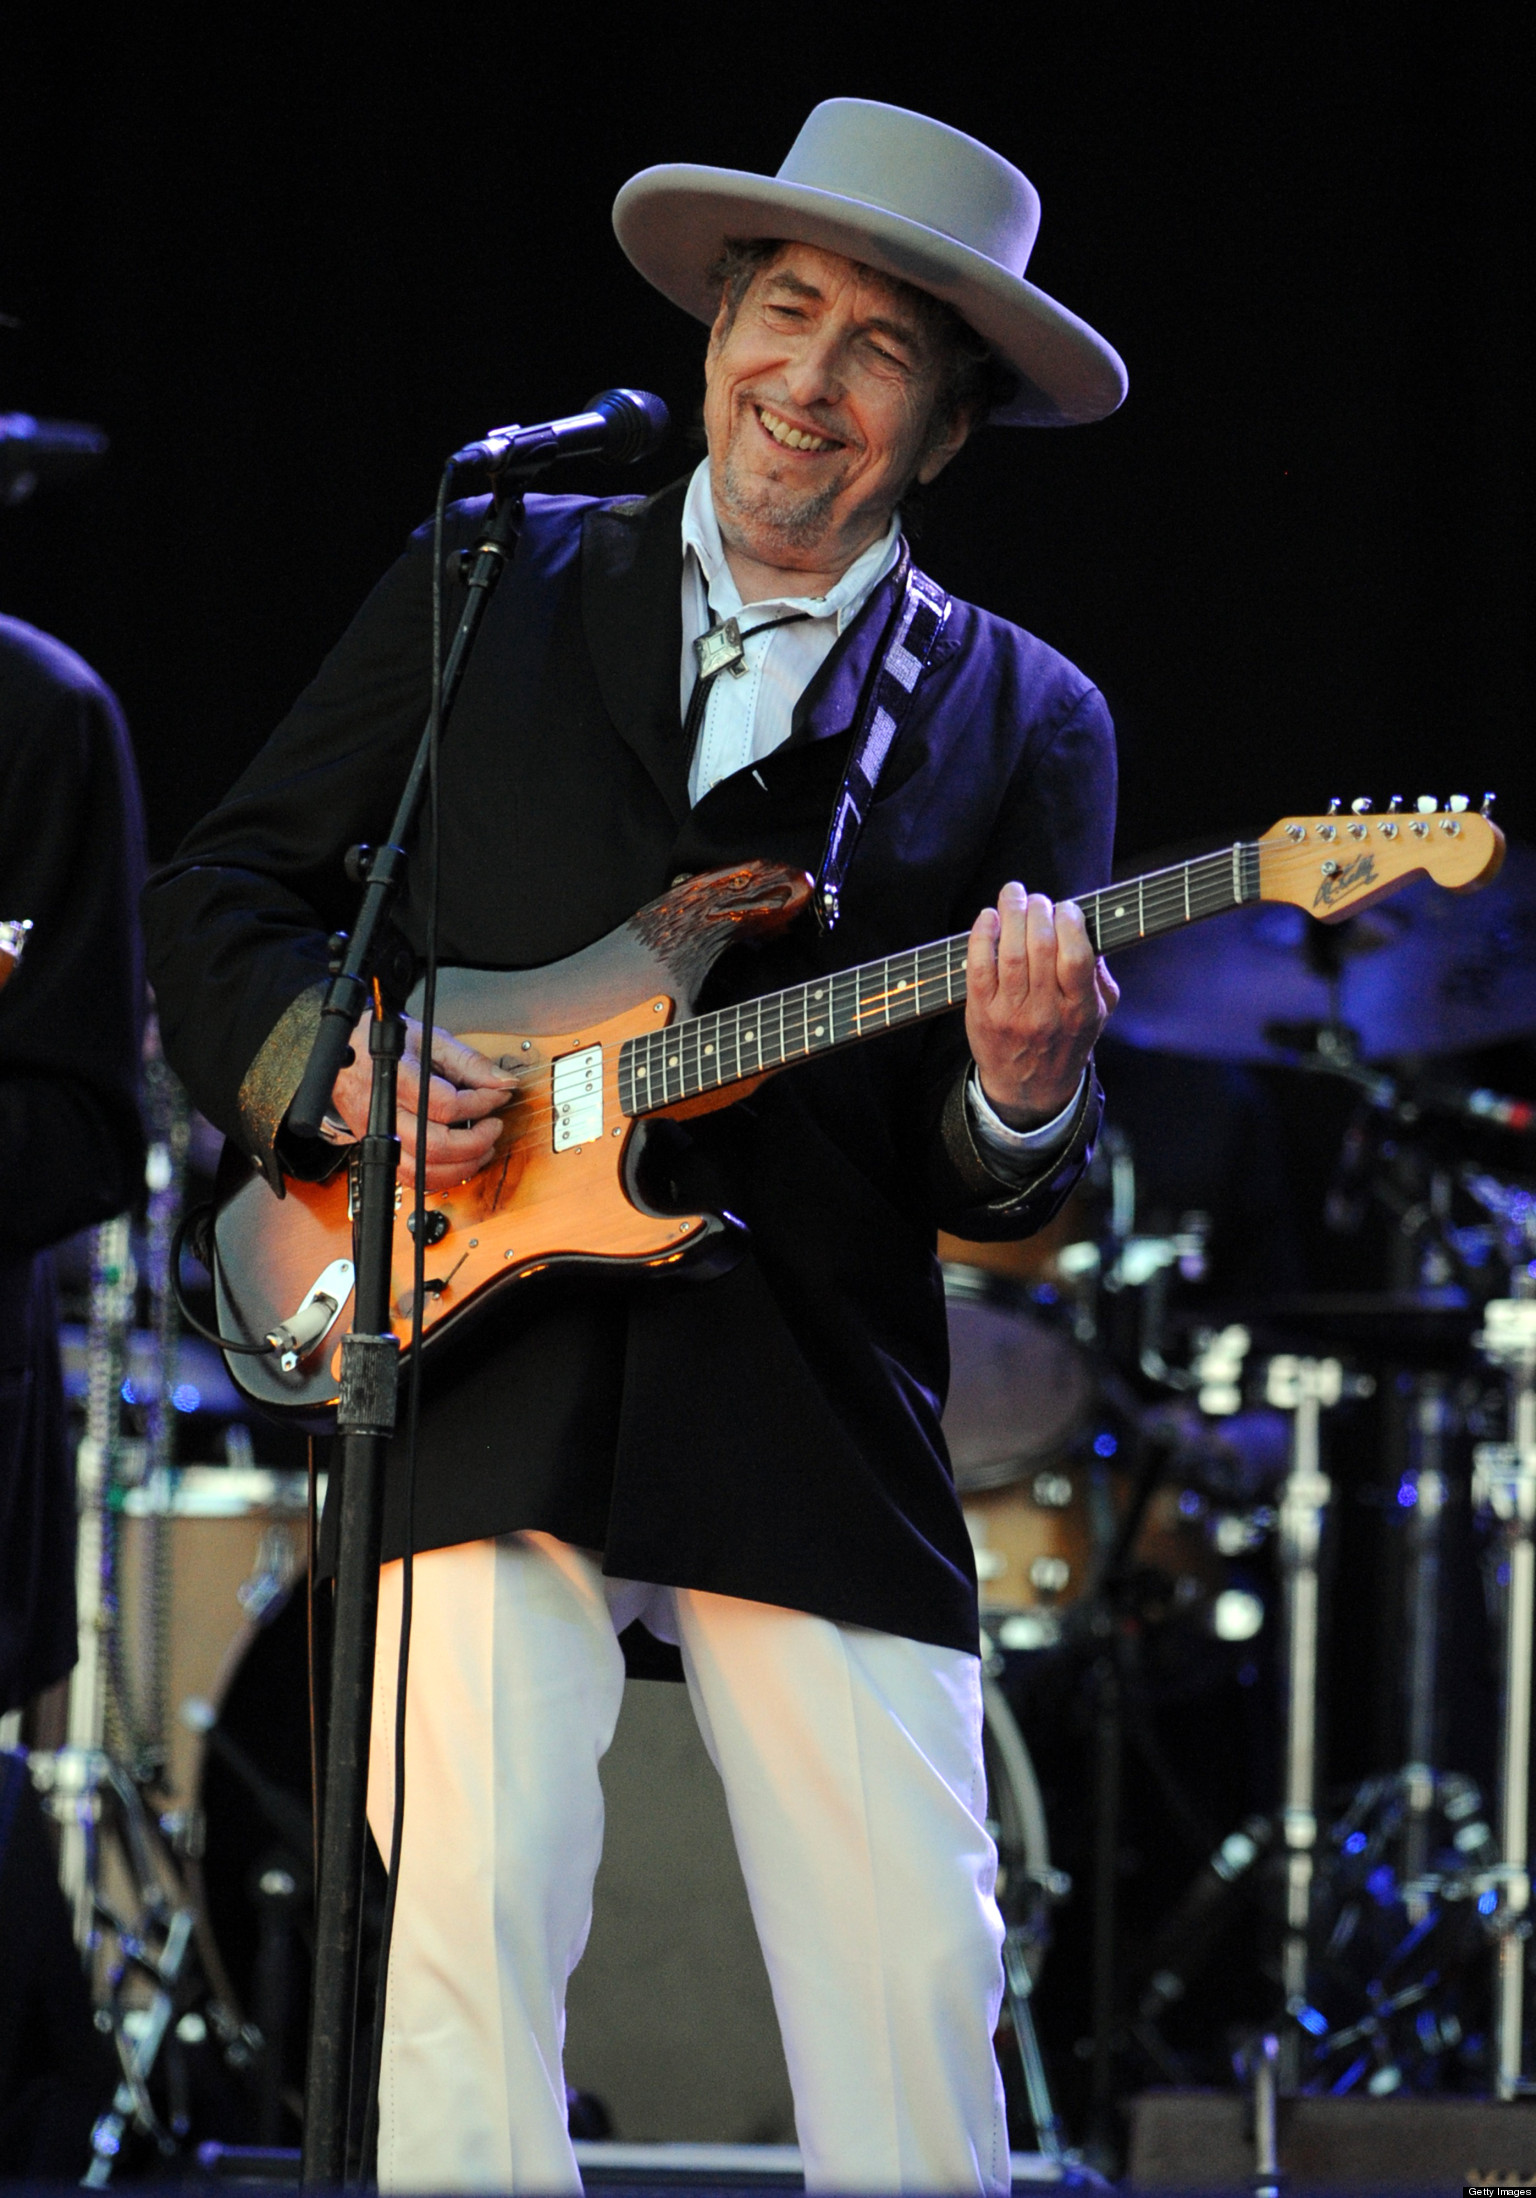 Bob Dylan Tour, AmericanaramA Festival Of Music, To Include Wilco, My Morning Jacket